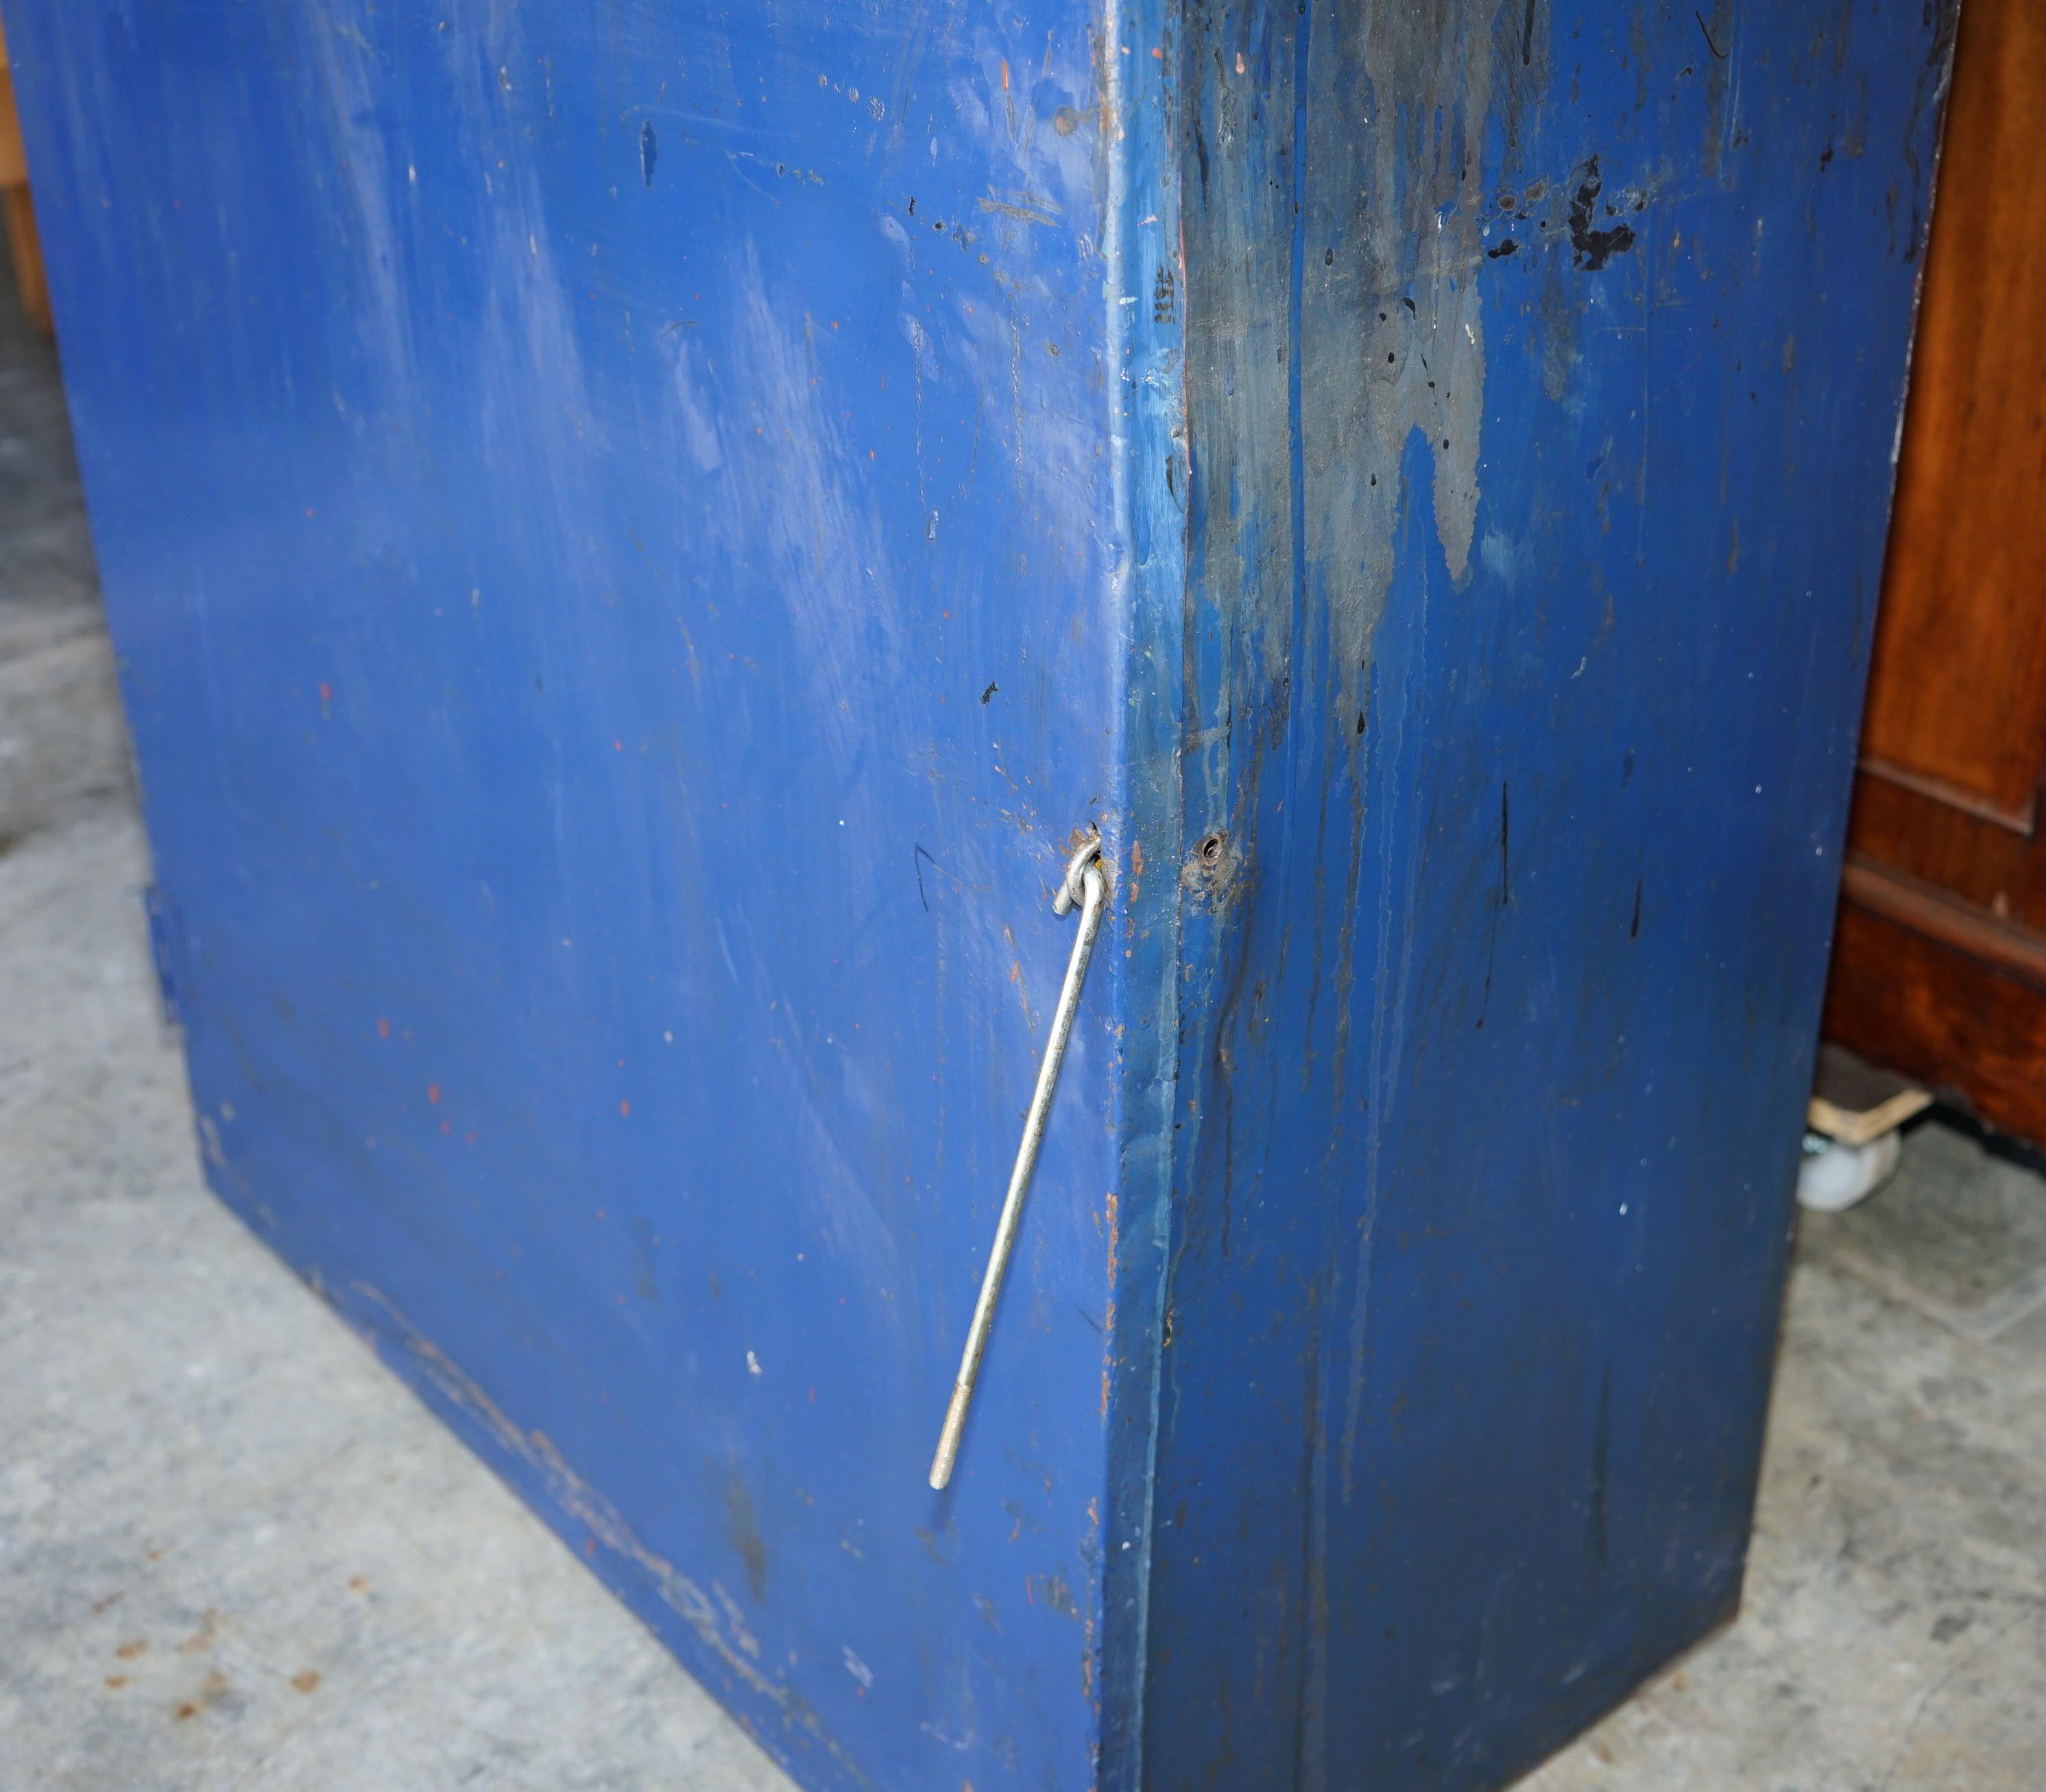 English Industrial Steel Large circa 1950s Metal Workers Paint Cupboard Very Rare Find For Sale